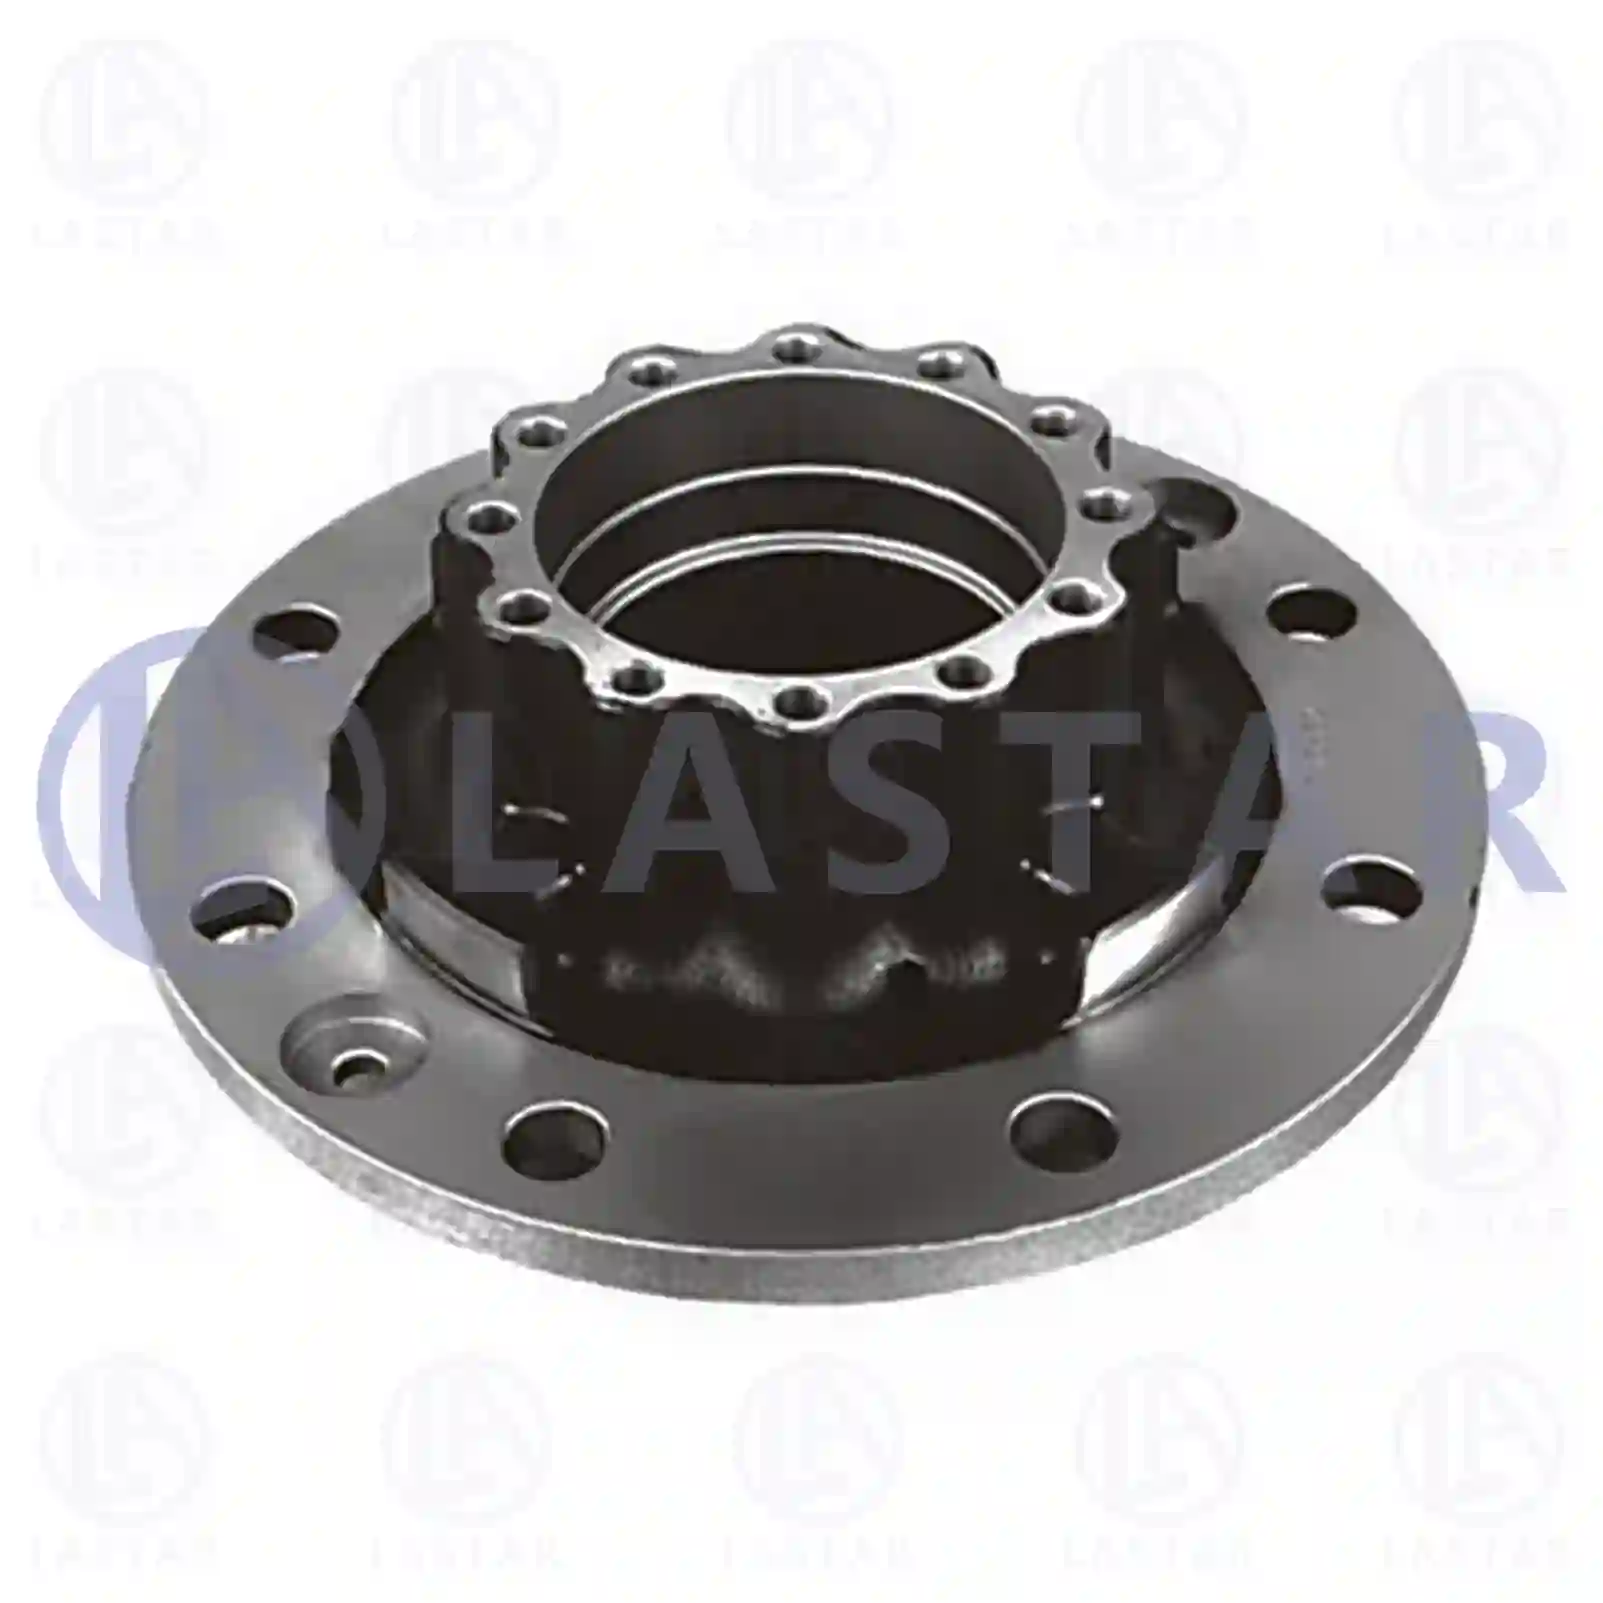 Wheel hub, without bearings, 77726685, 07173696, 7173696, ZG30236-0008, , , ||  77726685 Lastar Spare Part | Truck Spare Parts, Auotomotive Spare Parts Wheel hub, without bearings, 77726685, 07173696, 7173696, ZG30236-0008, , , ||  77726685 Lastar Spare Part | Truck Spare Parts, Auotomotive Spare Parts